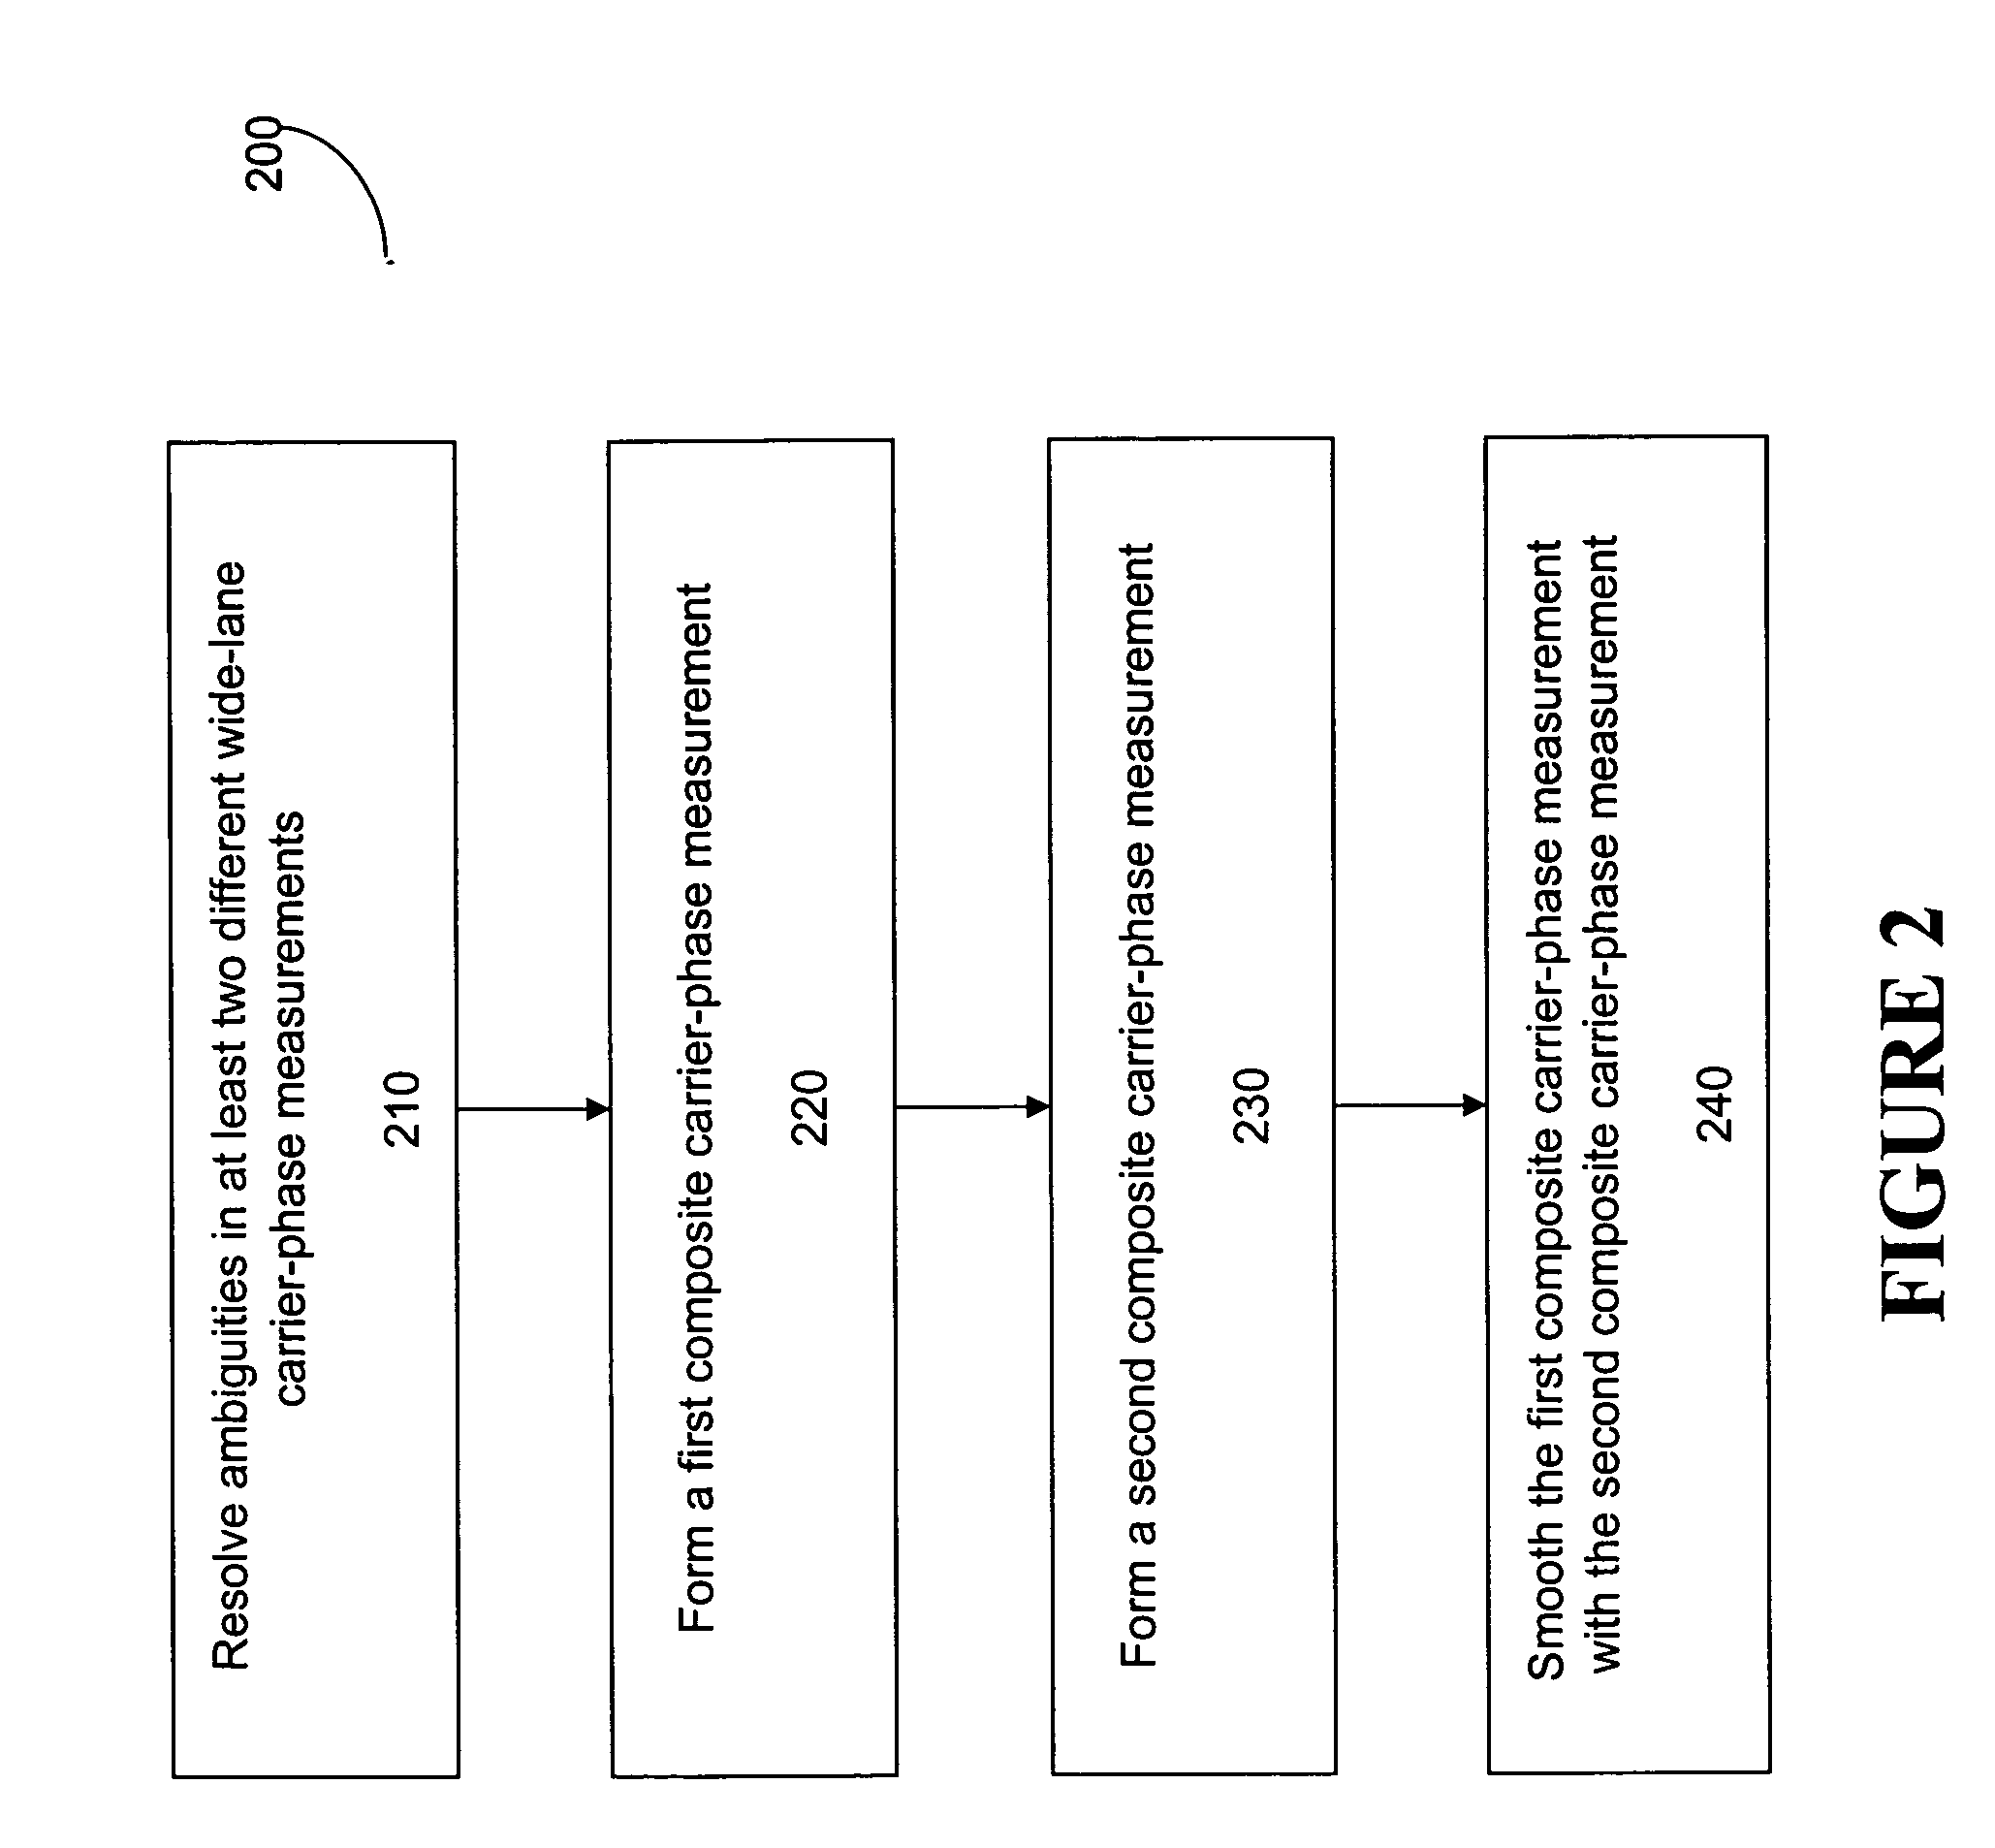 Method for using three GPS frequencies to resolve carrier-phase integer ambiguities